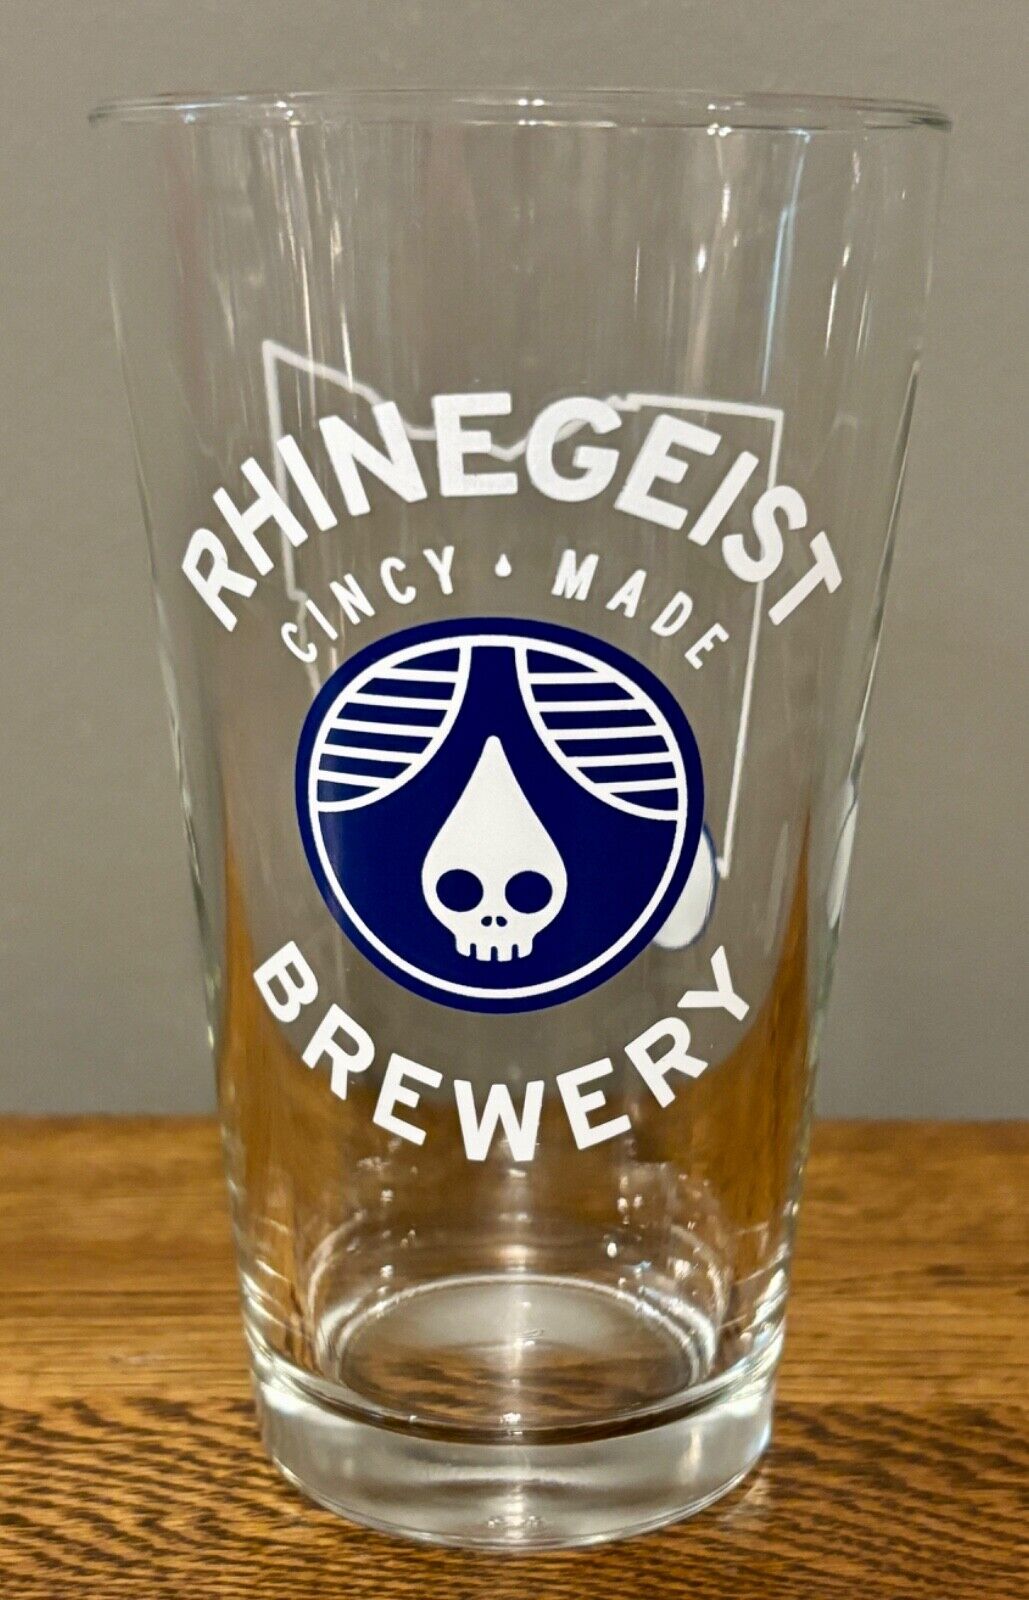 NEW Rhinegeist Brewery Made in Cincy Ohio Map Pint Beer Glass